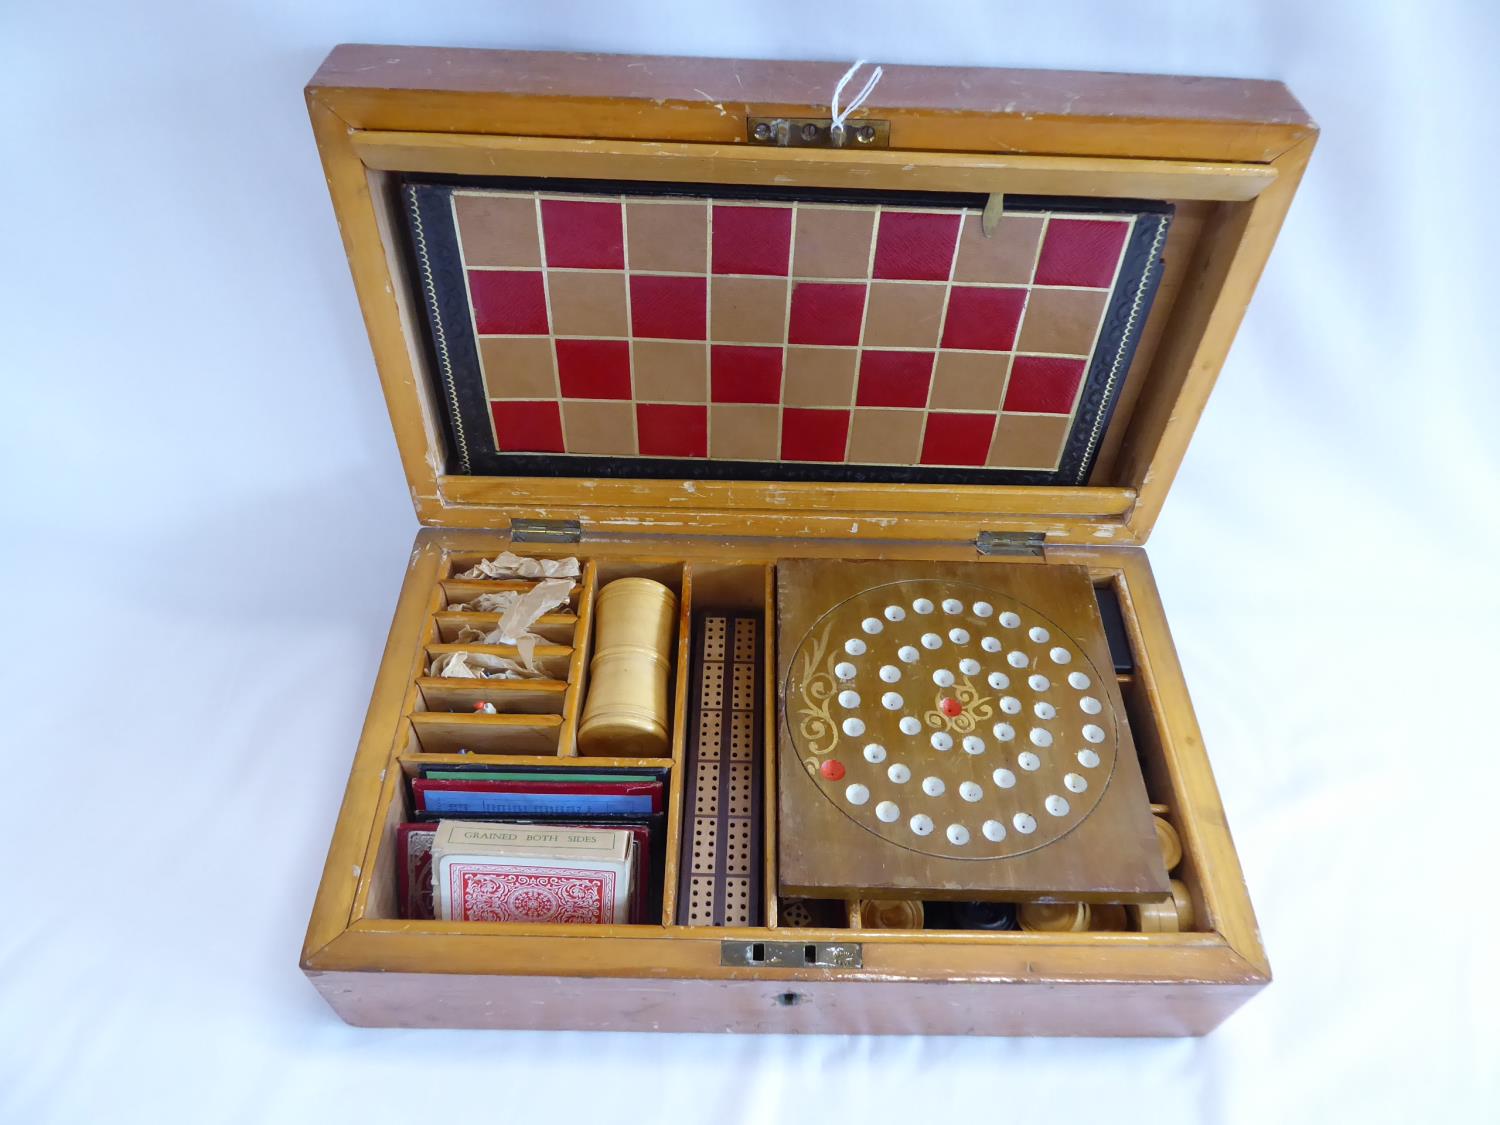 Early 20thC F H Ayres Ltd compendium of games in fitted wooden case - to include the steeplechase, - Image 6 of 6